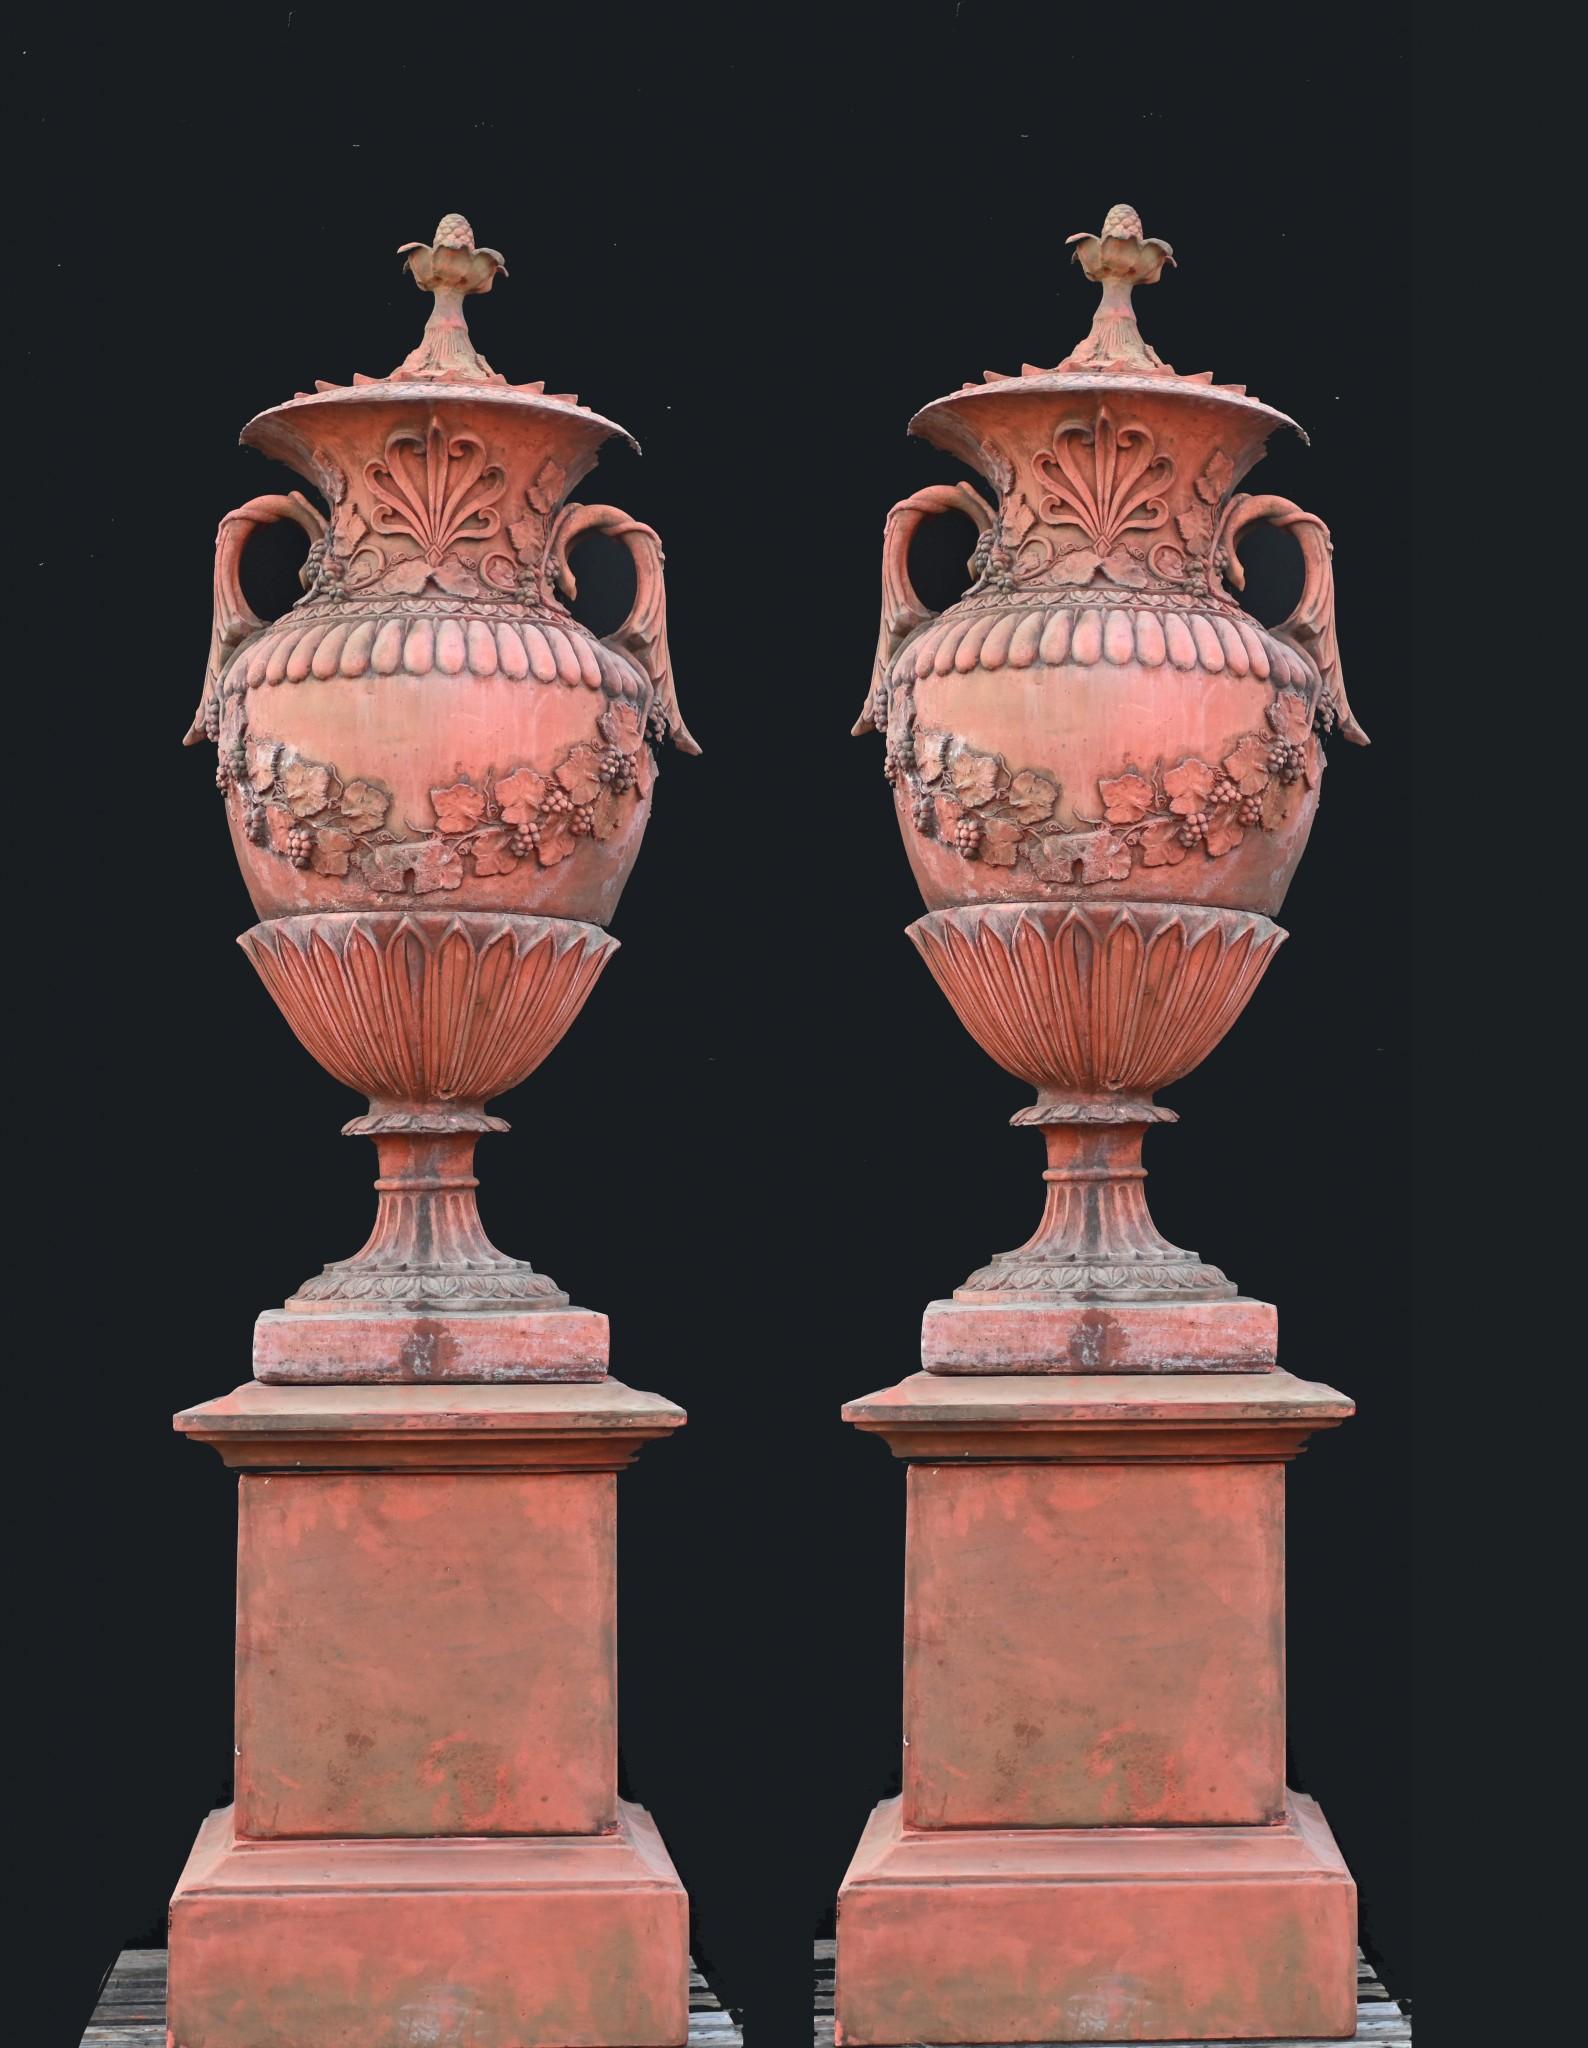 Stunning pair of massive English terracotta garden urns
If you are looking for that classic English garden look - then here it is
Impressive pair of an important architectural quality
Stand in at almost seven feet tall on the pedestal bases
Great